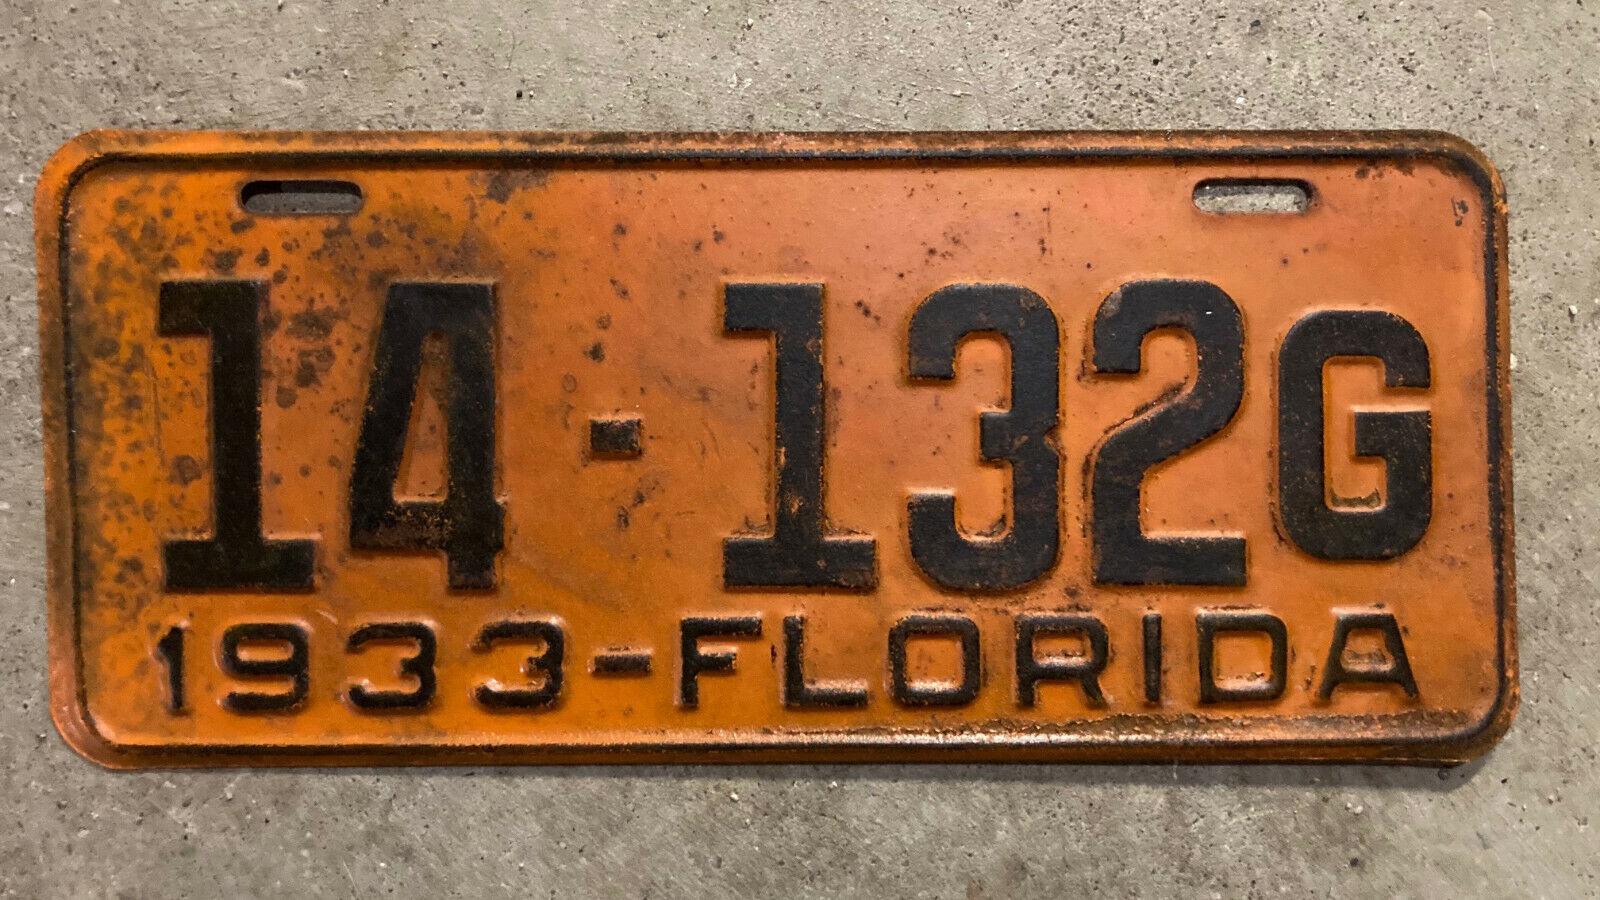 Florida 1933 License Plate 14-132g Ford Chevy Yom Dmv Clear Truck Commercial